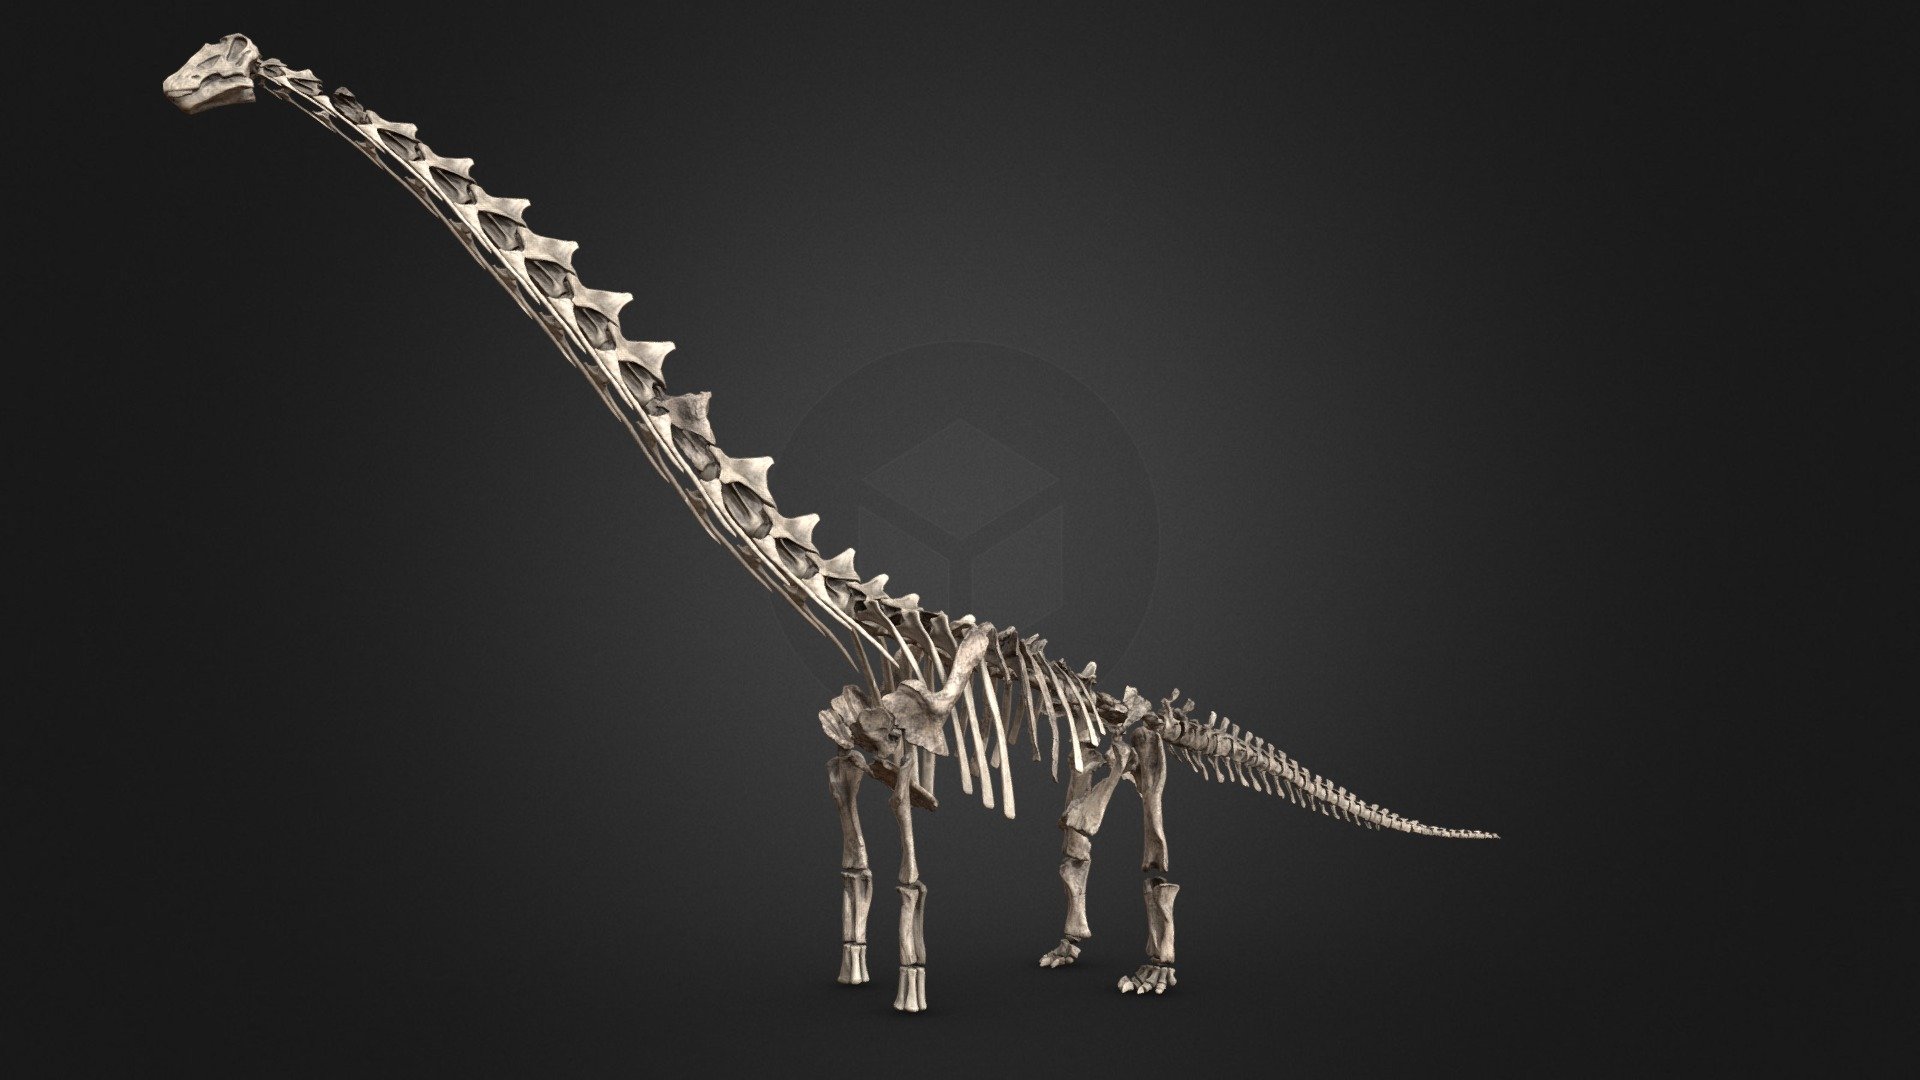 Low poly reconstructed skeleton of the giant sauropod Dreadnoughtus schrani from Southern Patagonia, Argentina. Dreadnoughtus lived during the Late Cretaceous some 70 to 76 million years ago.

The missing elements have been filled in with my own sculpted bones based on other titanosaurs. Existing bones themselves have not been repaired. Only two vertebrae have been only very slightly uncrushed.

Modified from https://skfb.ly/BSDy by dinosaurhunter under the CC Attribution licence.

From Lacovara et al., 2014 - Dreadnoughtus skeleton - 3D model by Olof Moleman (@lordtrilobite) 3d model